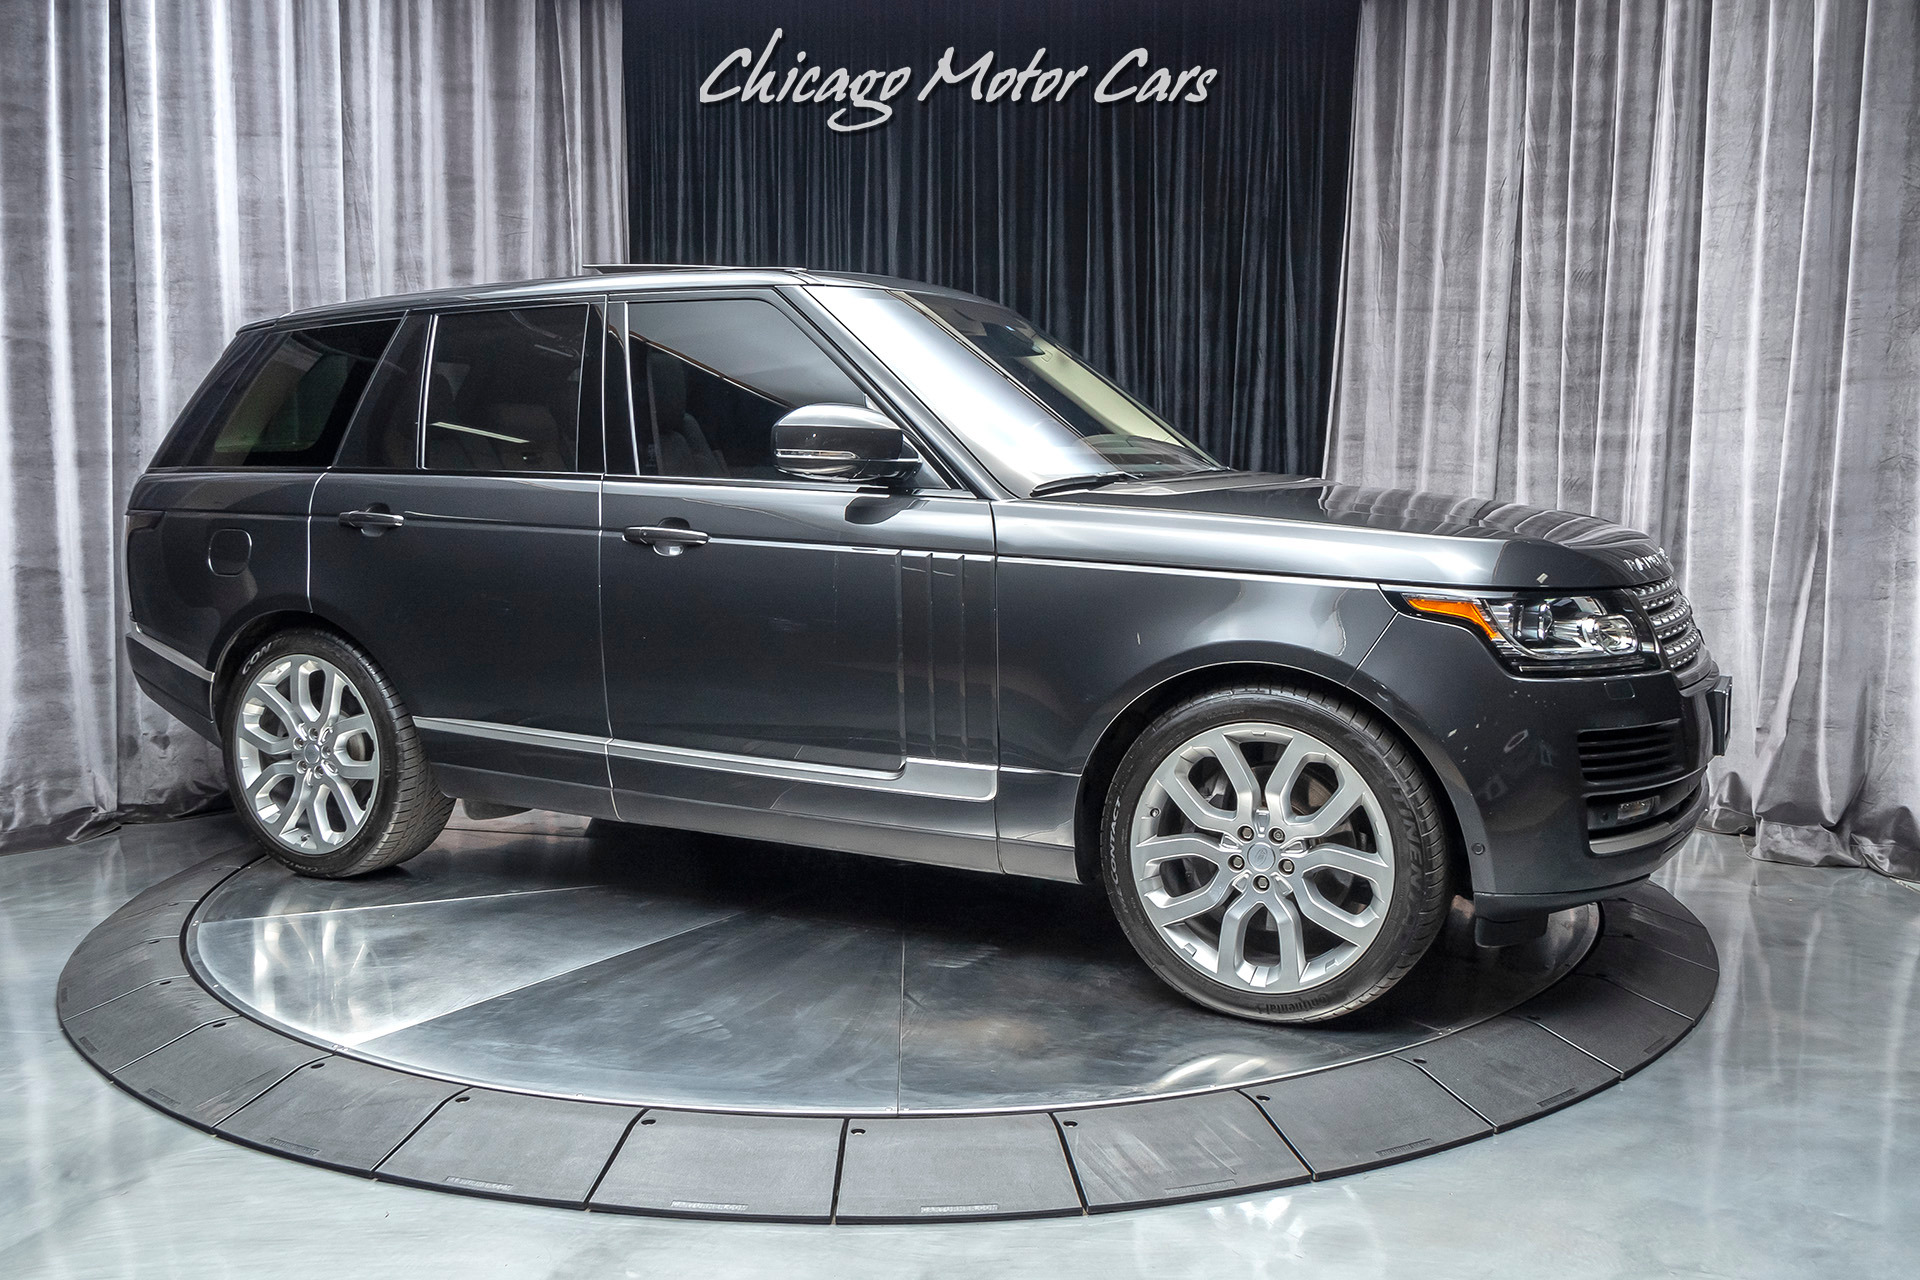 Used-2016-Land-Rover-Range-Rover-Supercharged-AWD-SUV-MSRP-123K-LOADED-WITH-FACTORY-OPTIONS